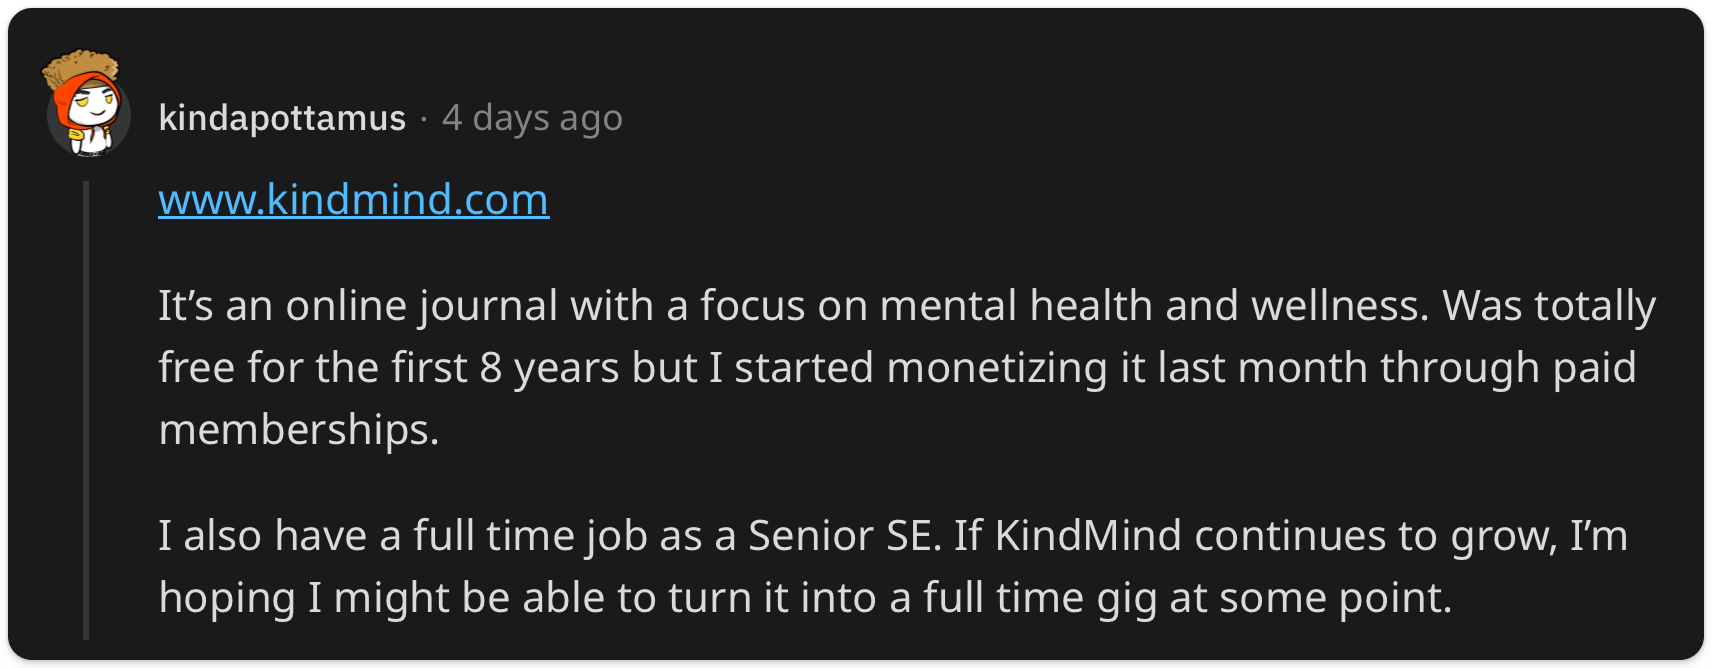 "It’s an online journal with a focus on mental health and wellness. Was totally free for the first 8 years but I started monetizing it last month through paid memberships. I also have a full time job as a Senior SE. If KindMind continues to grow, I’m hoping I might be able to turn it into a full time gig at some point."